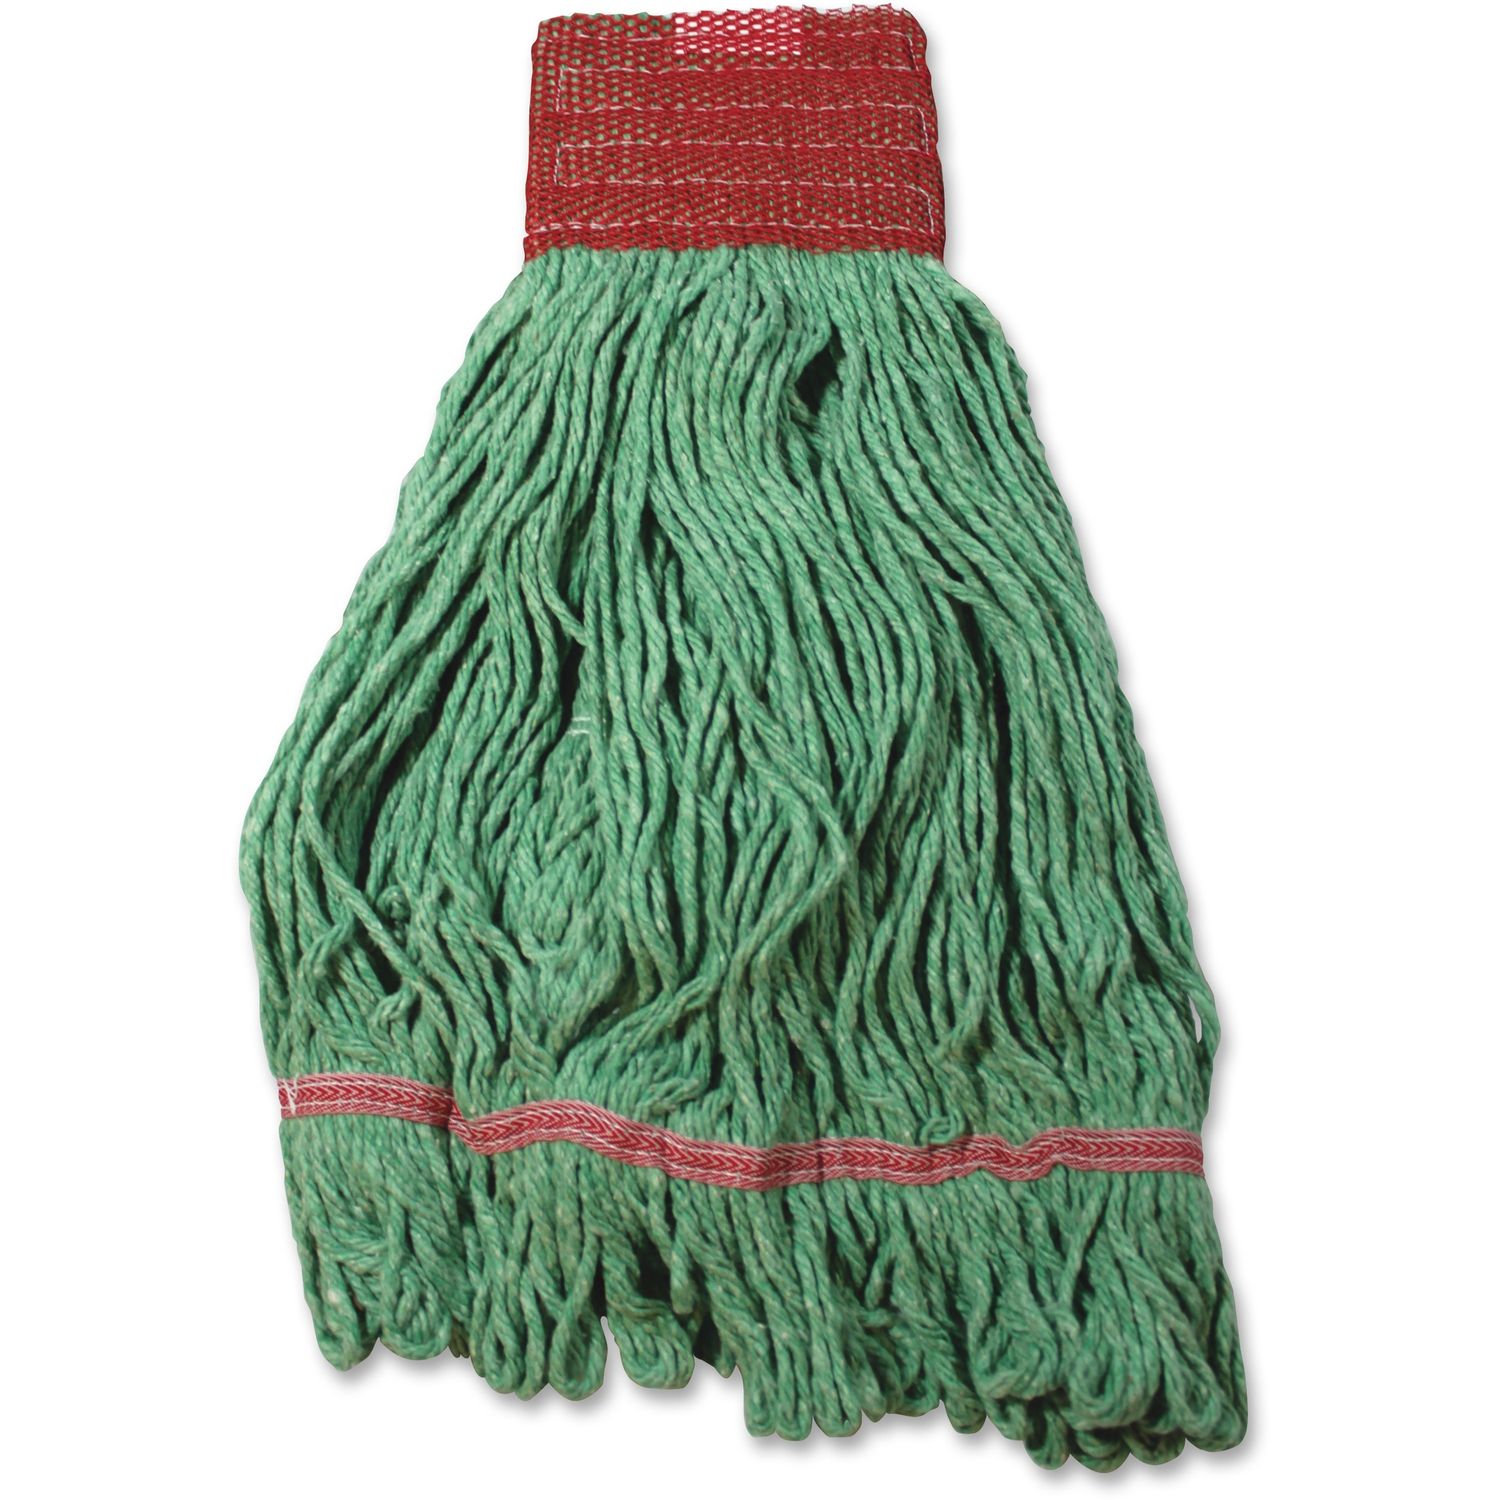 Looped End Wet Mop Cotton, Synthetic